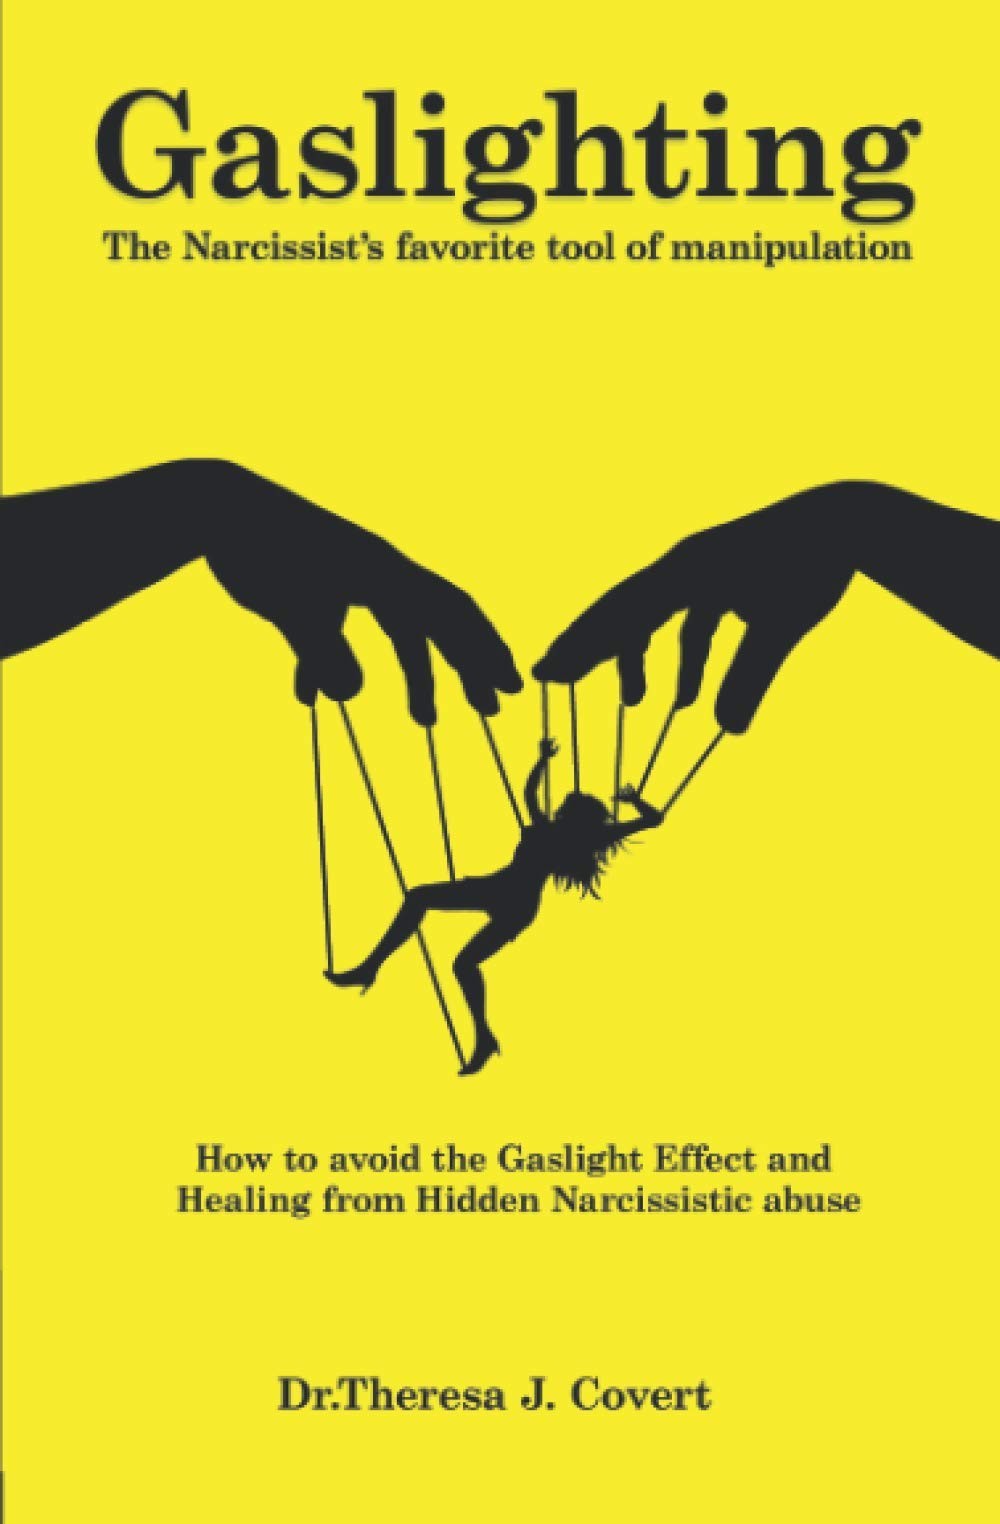 The Gaslighting Workbook: When Reality Isn't Real - the Most Effective Methods to Avoid Mental Manipulation and Trust Yourself Again After Psychological Abuse